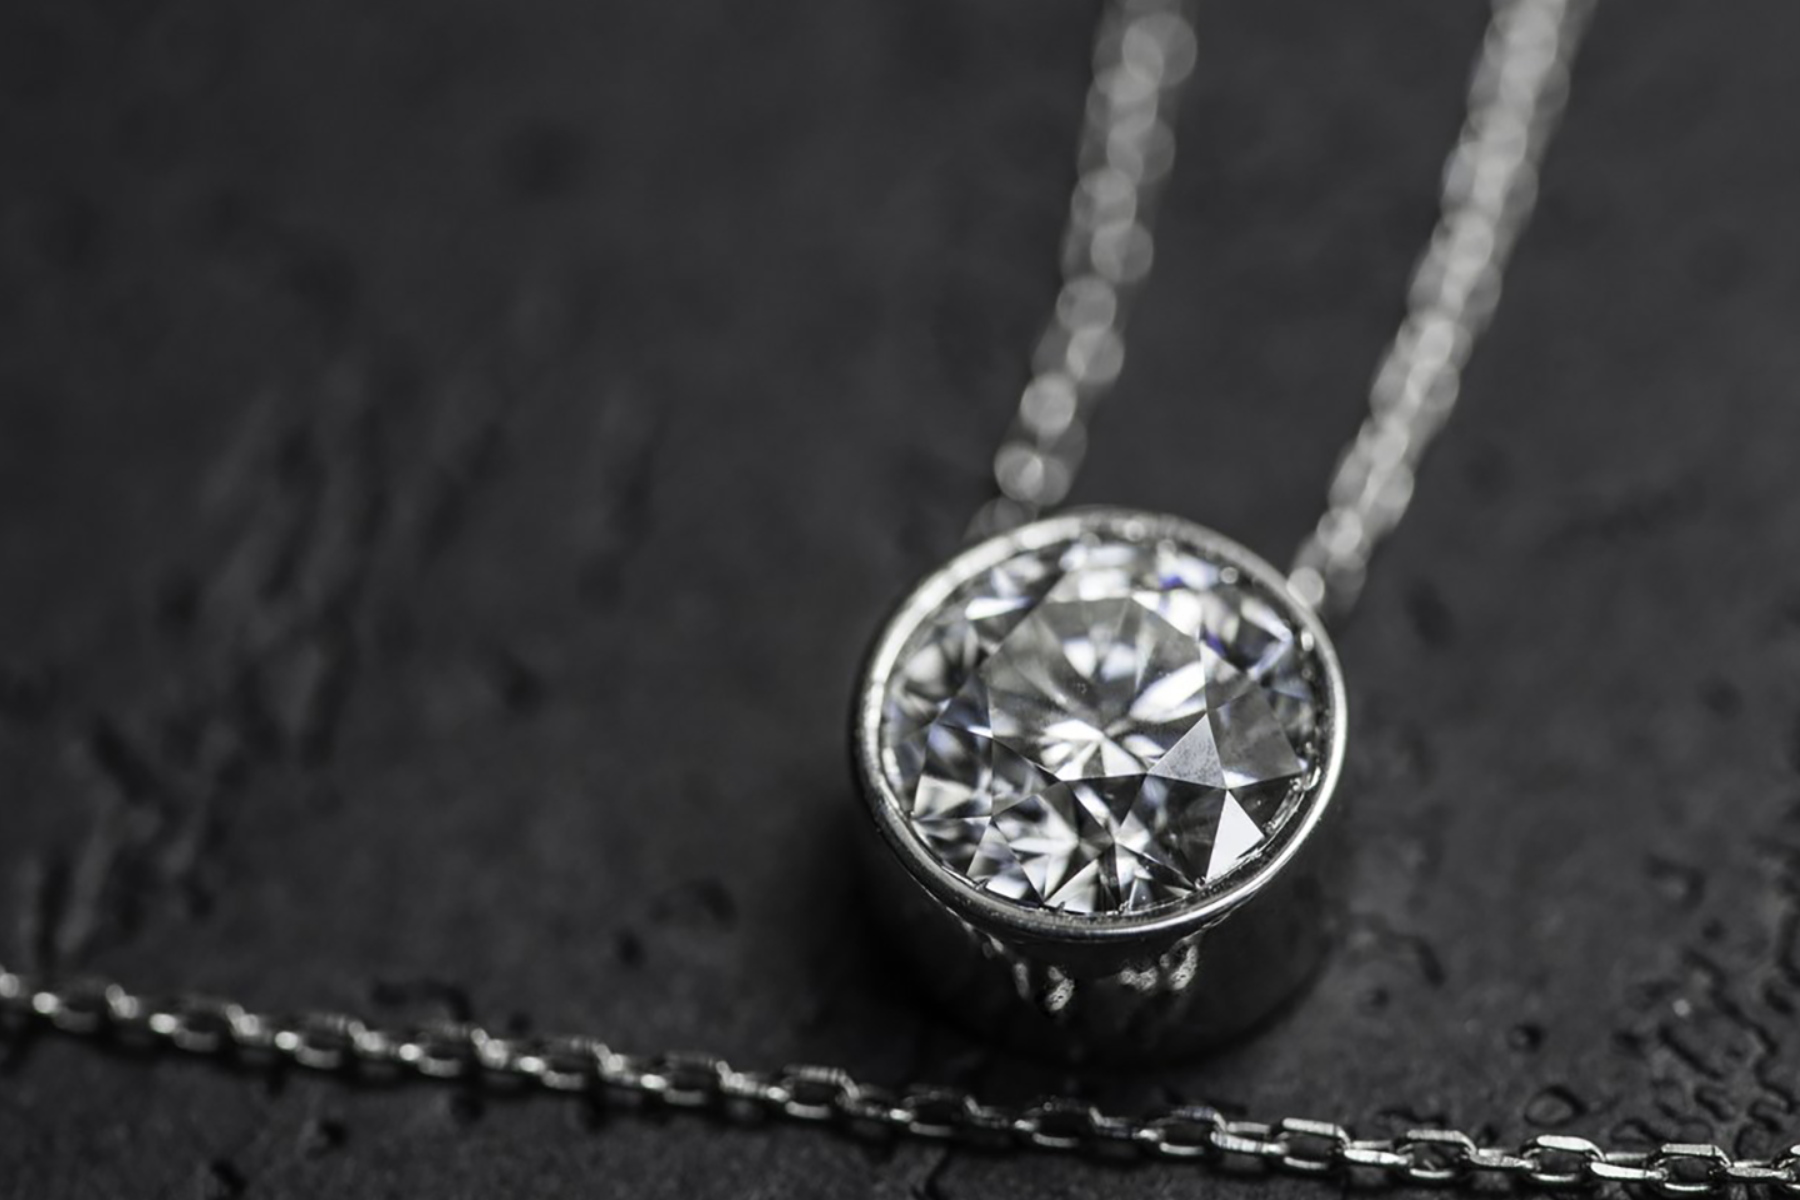 A necklace with a round diamond pendant